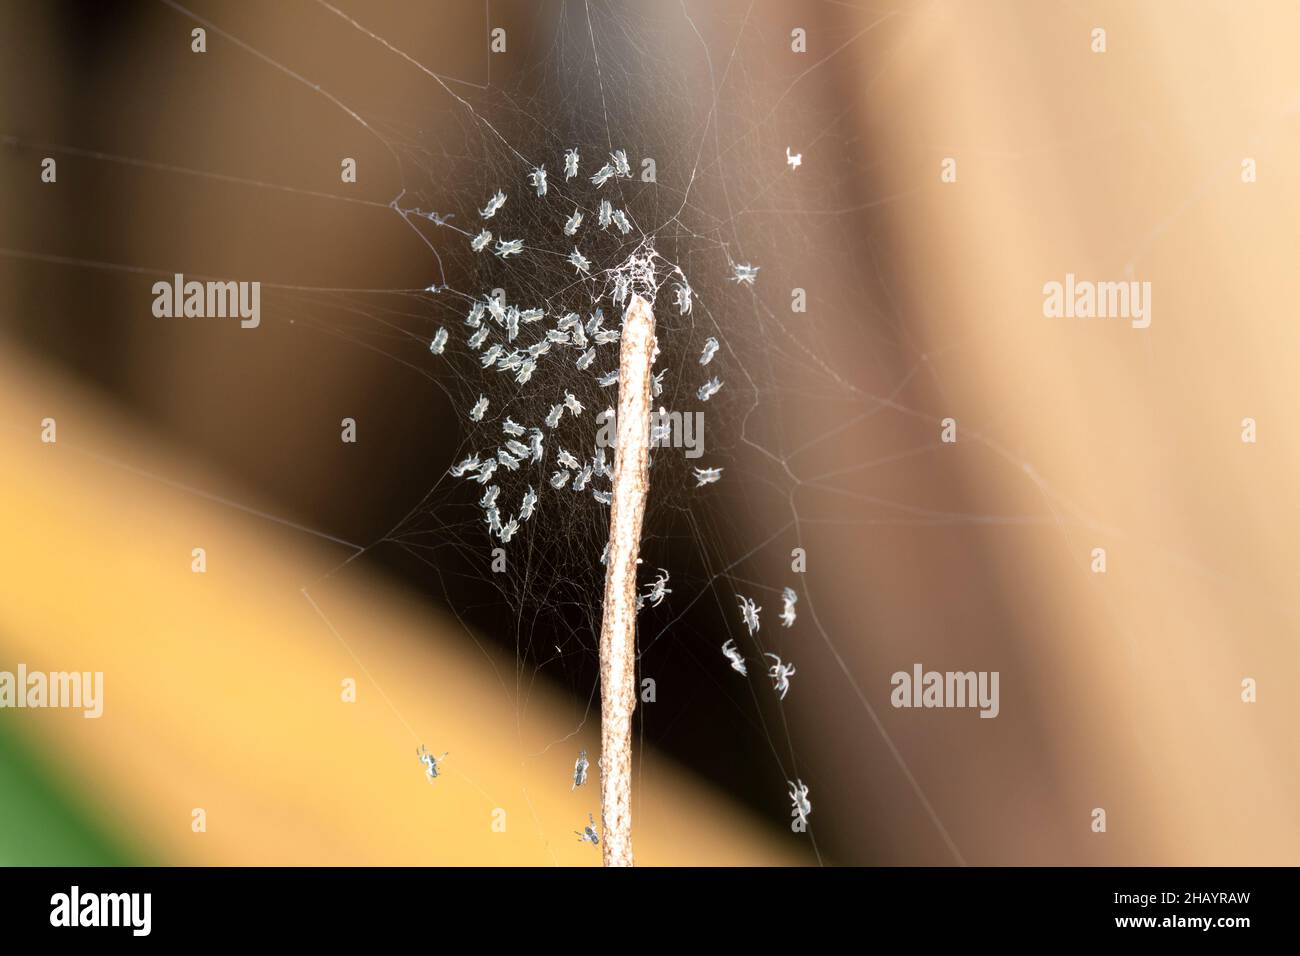 Spiderlings emerging out of eggsack, Cyclosa insulana or Debris orb weaver Stock Photo